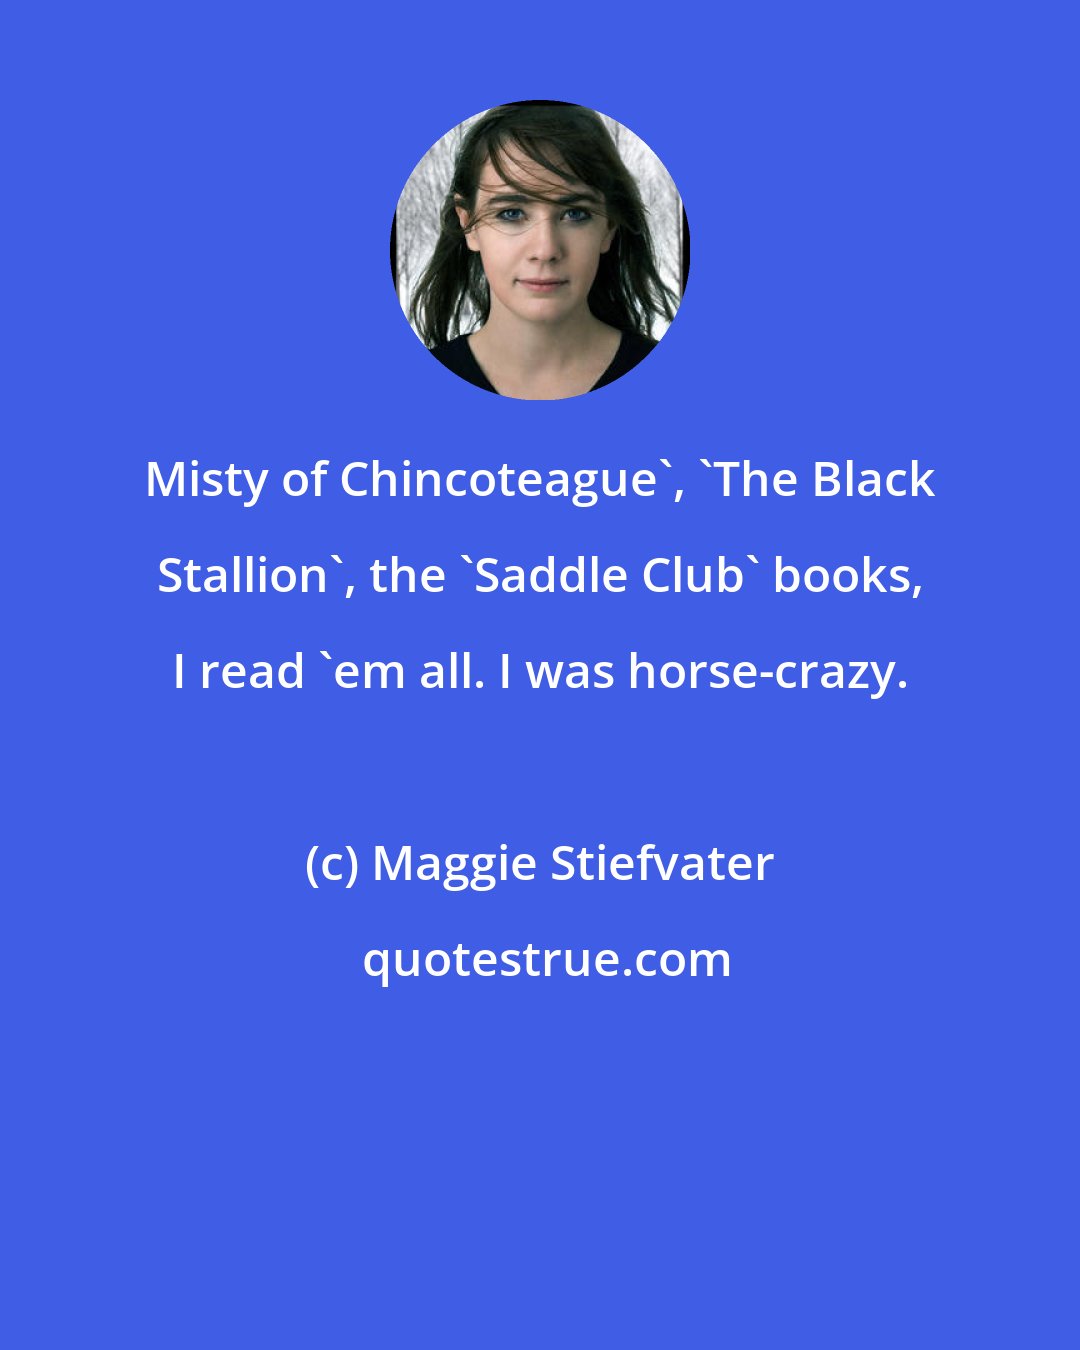 Maggie Stiefvater: Misty of Chincoteague', 'The Black Stallion', the 'Saddle Club' books, I read 'em all. I was horse-crazy.